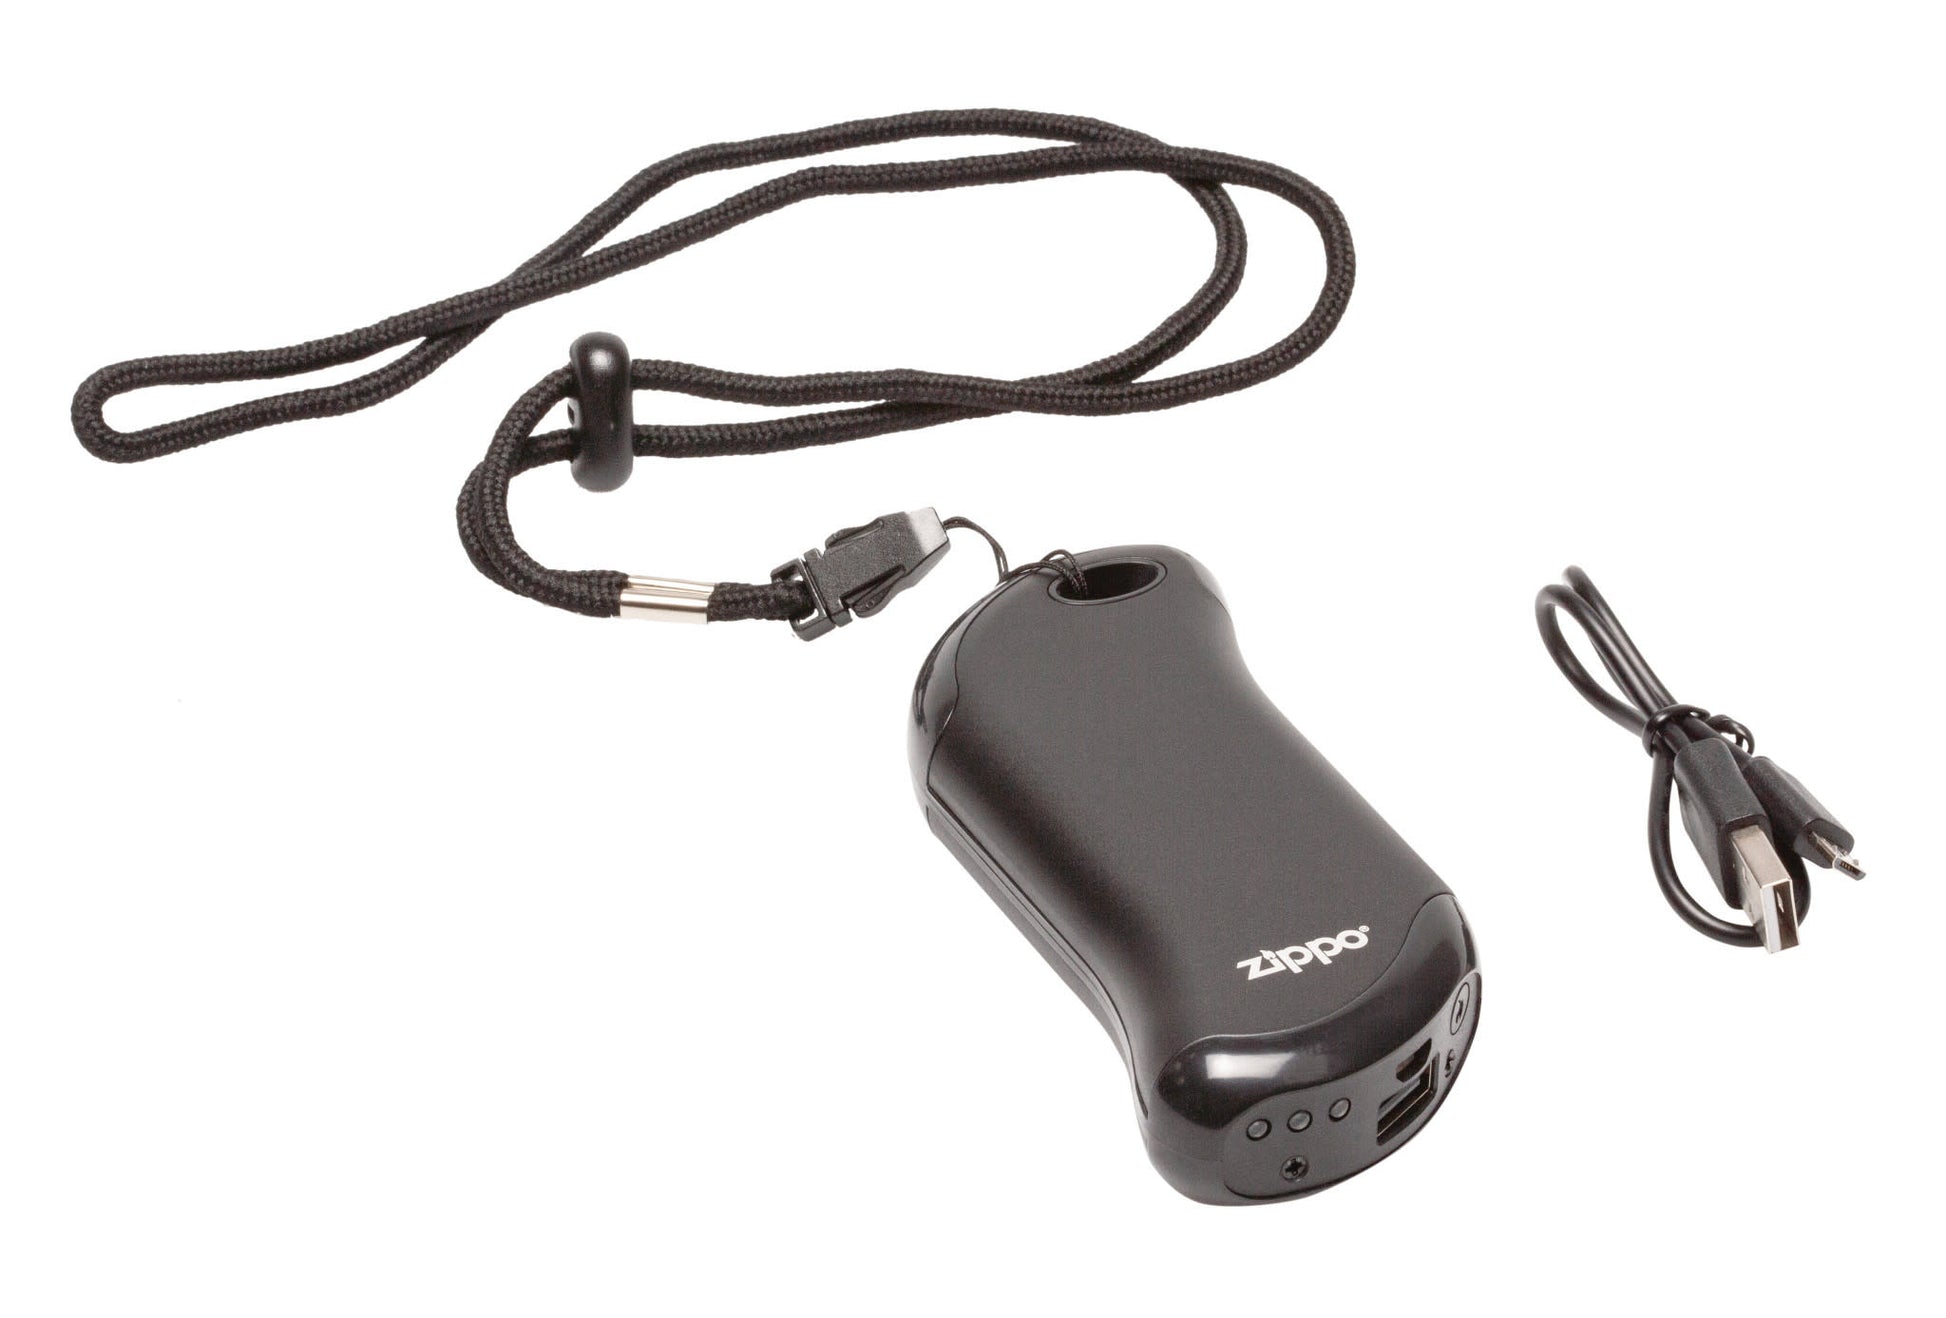 Black HeatBank 9s Rechargeable Hand Warmer with the included landyard and charging cable.